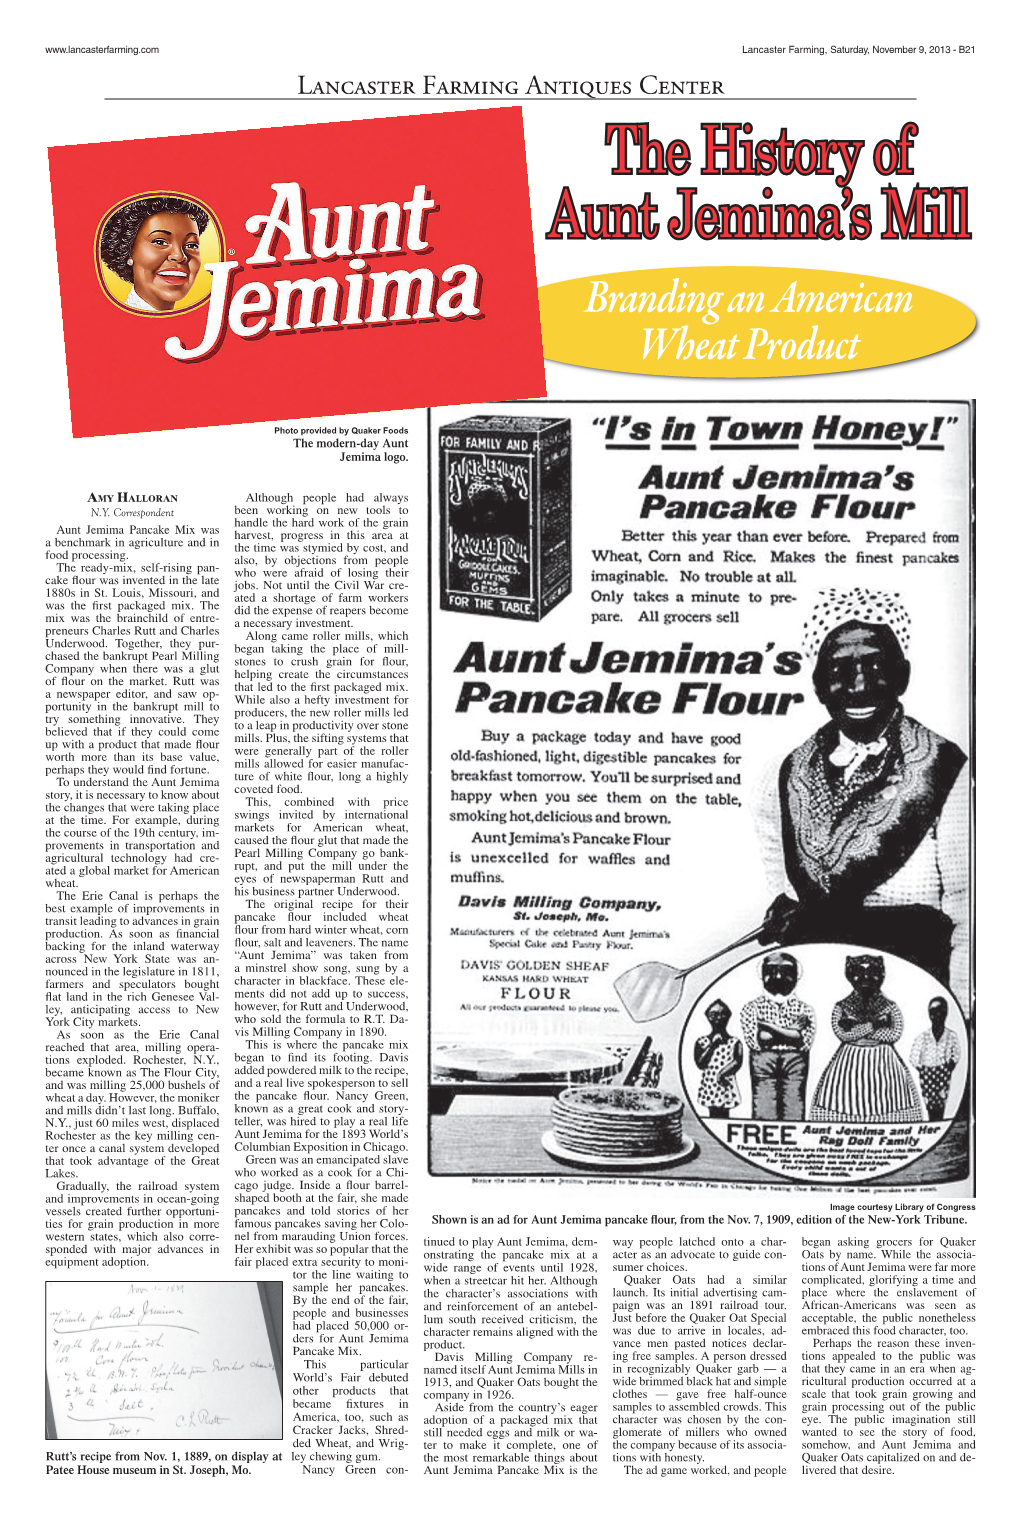 The History of Aunt Jemima's Mill